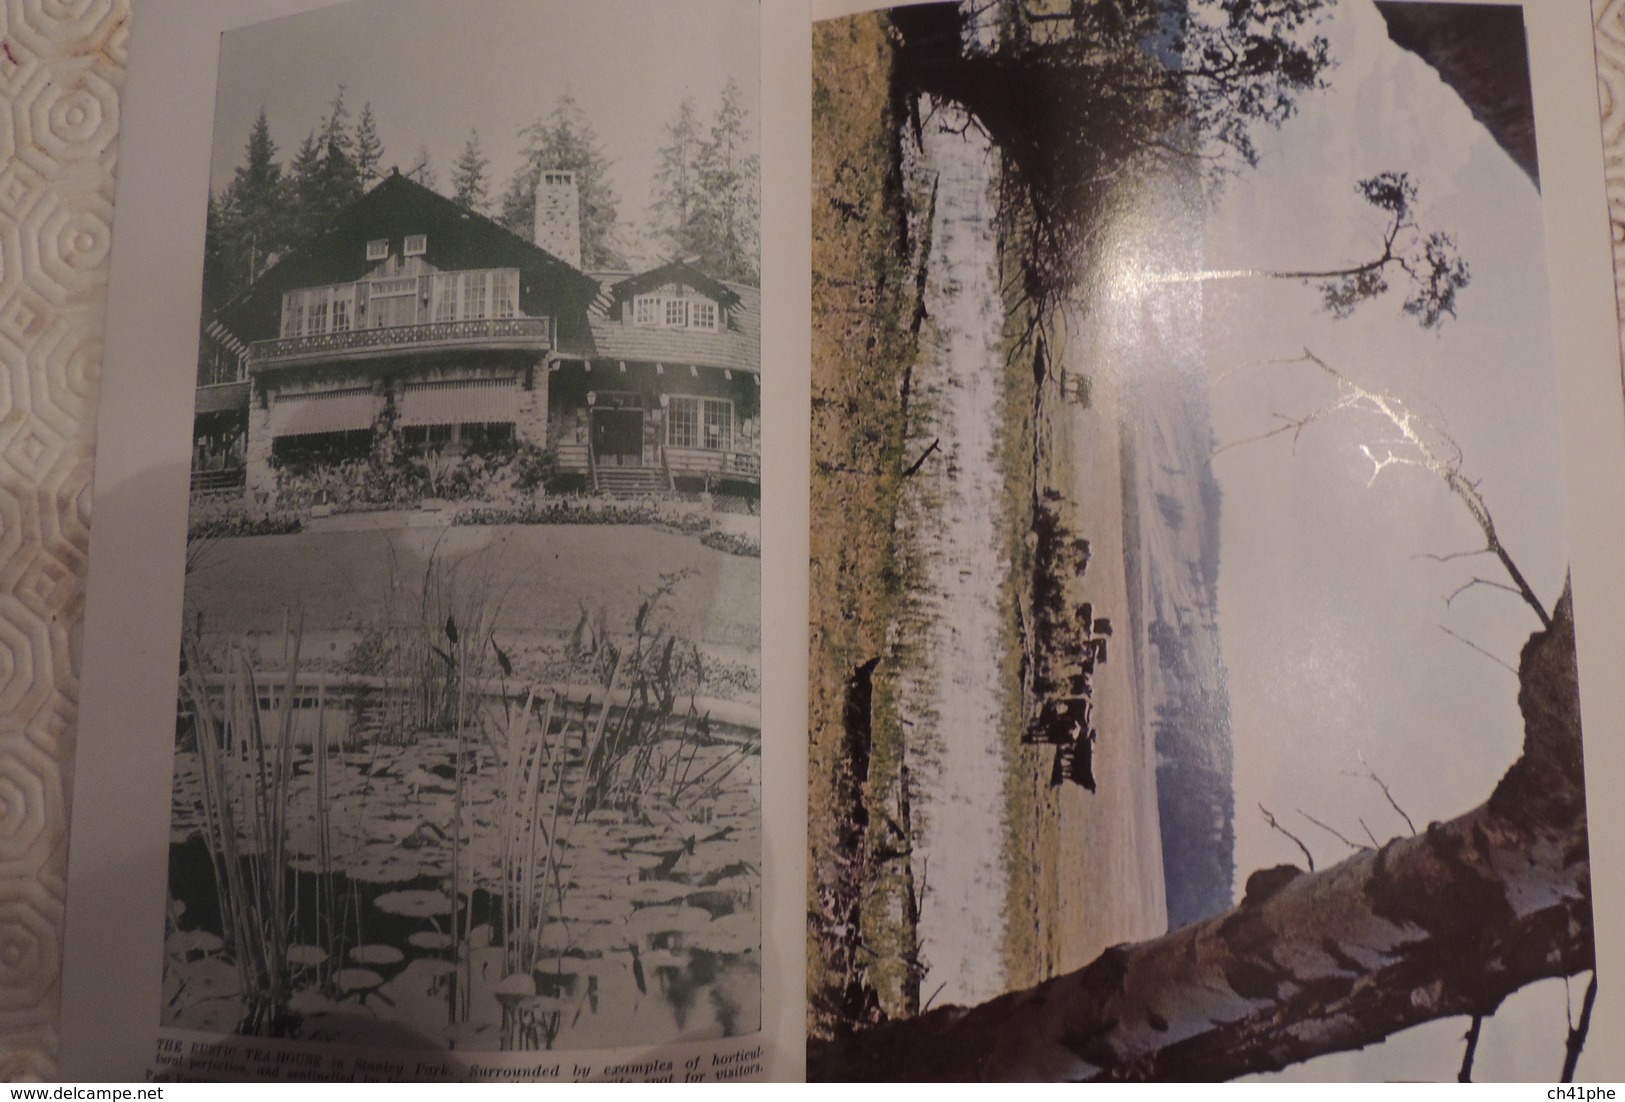 PARCKS AND RESORTS VANCOUVER / TRES NOMBREUSES PHOTOGRAPHIES ANNEE: VERS 1925-1935 - Cultural